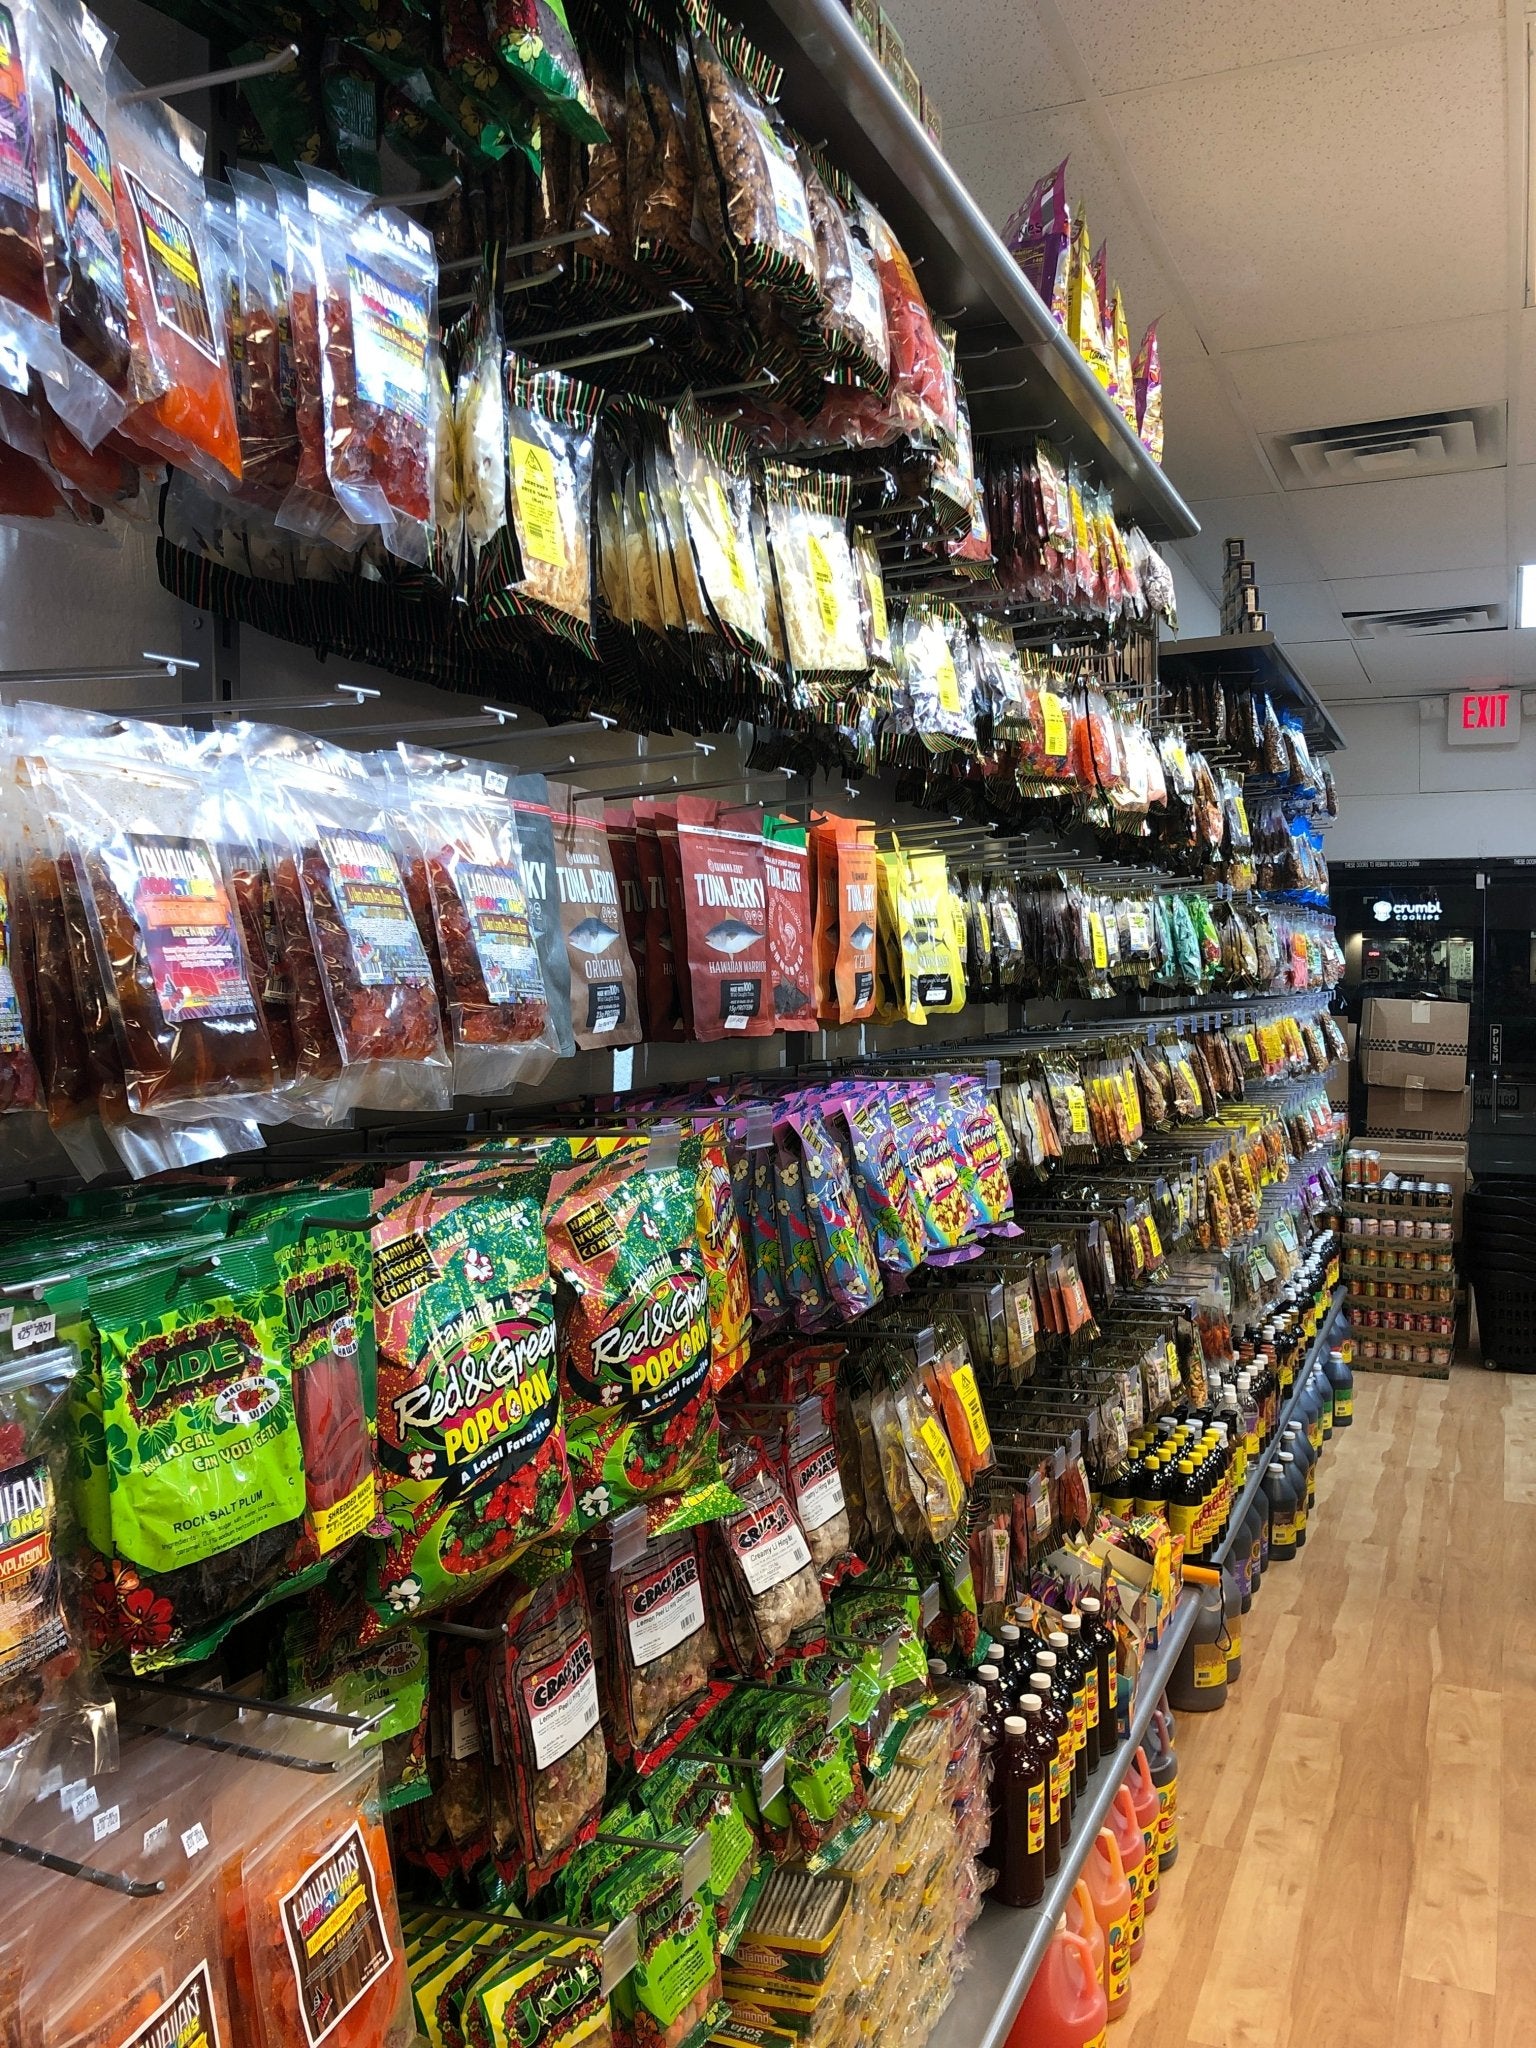 "Discover the Flavors and Culture of Hawaii at Leilani's Attic – Your Go-To Destination for Authentic Hawaiian Groceries and Gifts" - Leilanis Attic